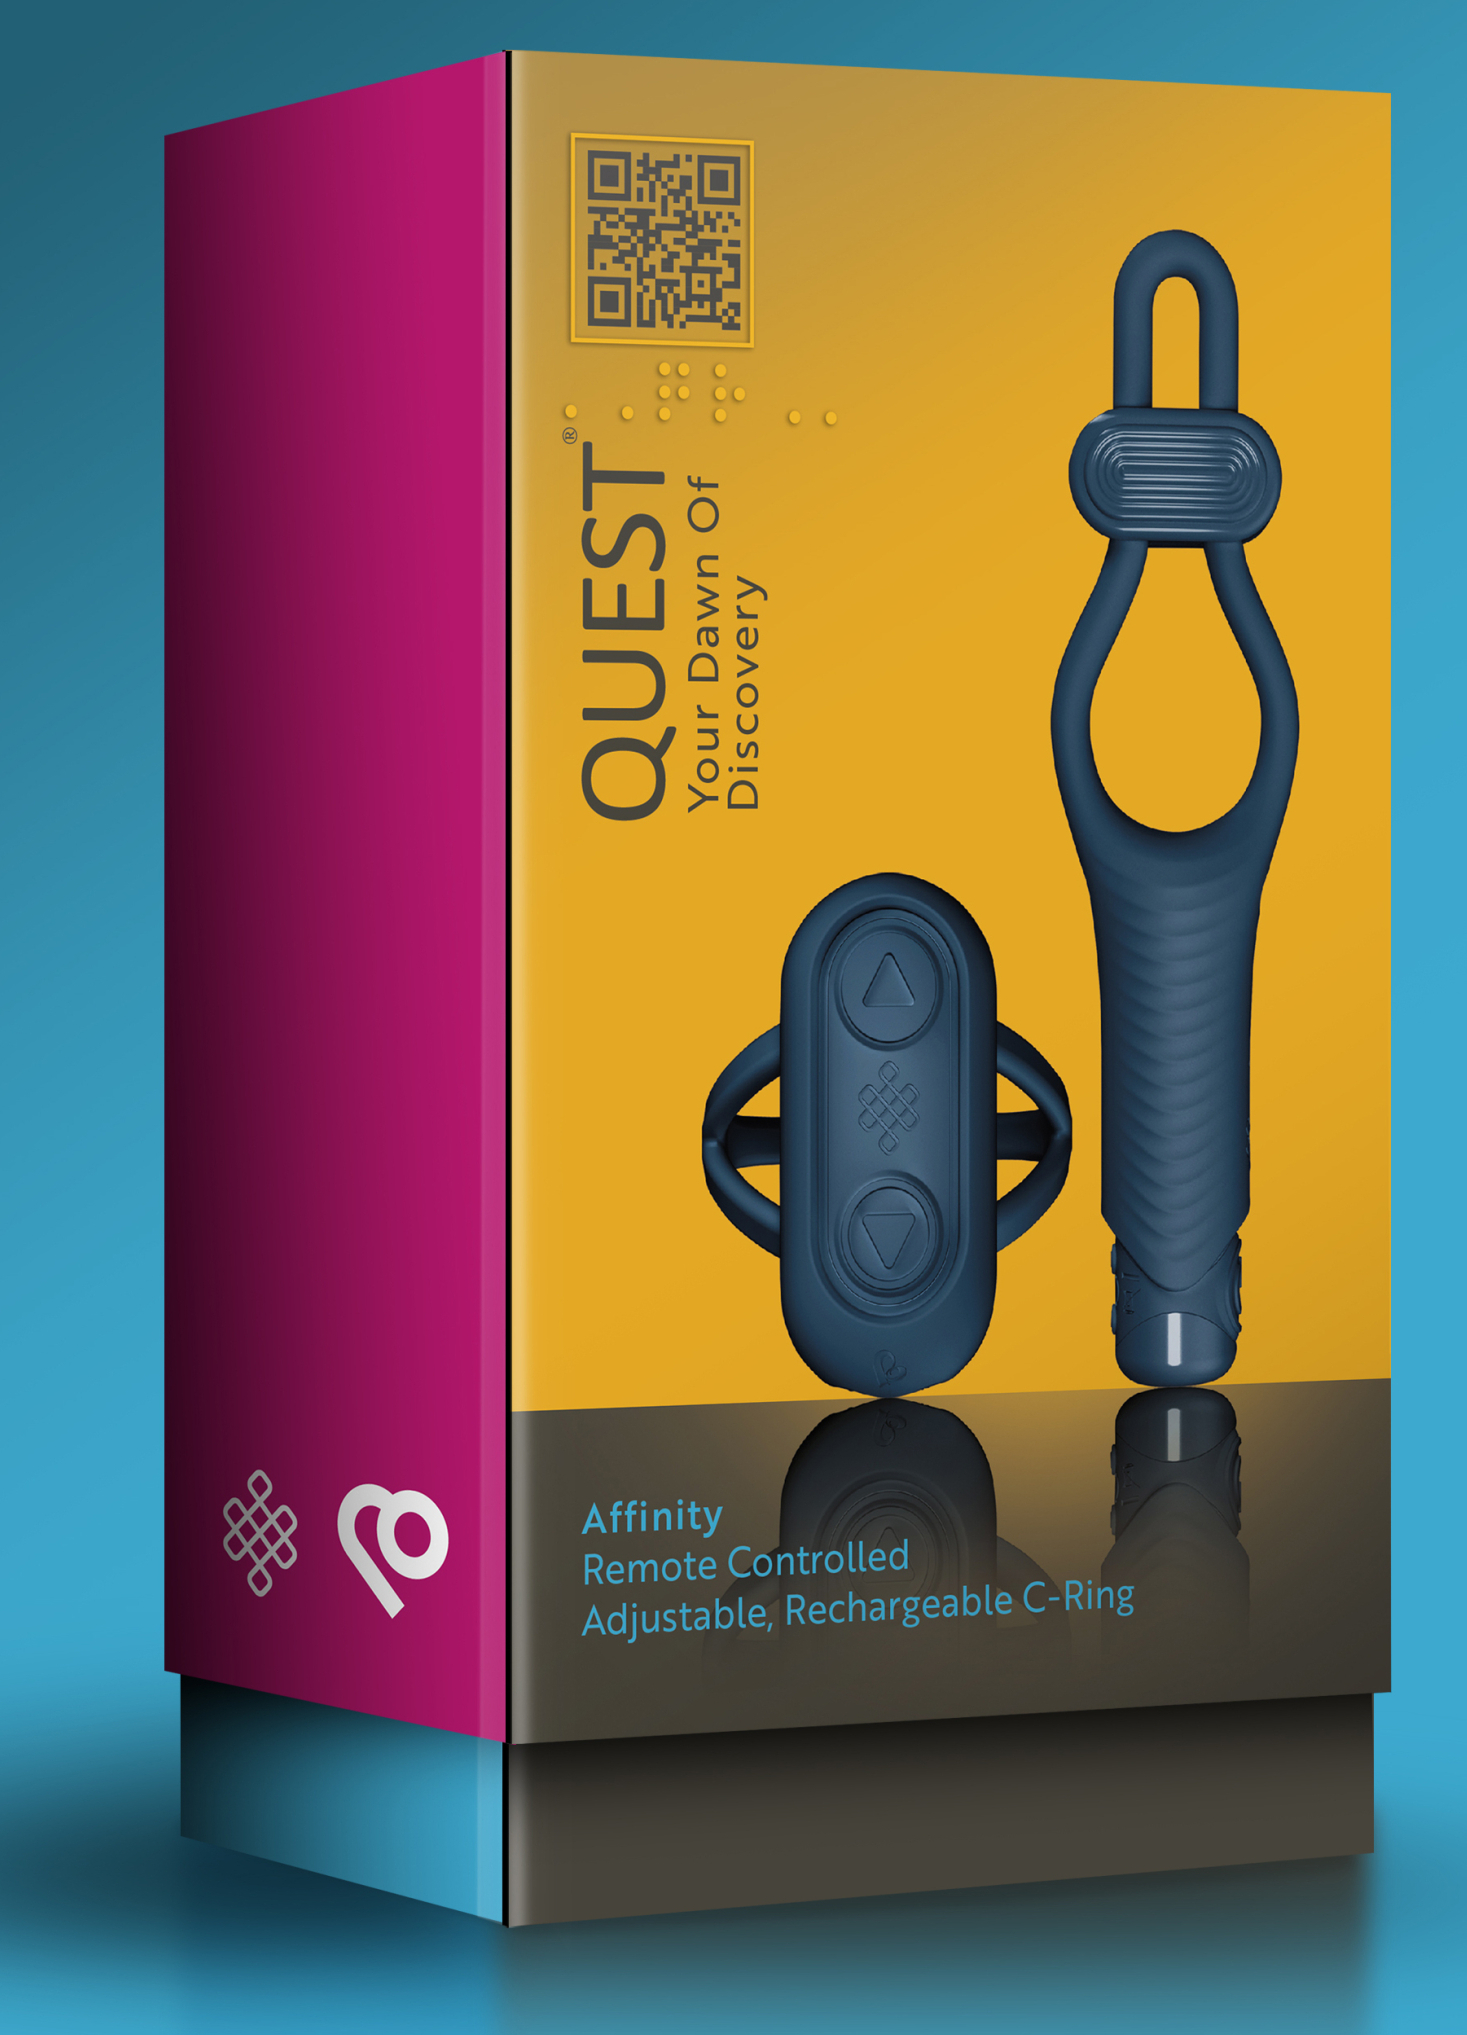 A boxed "Affinity" sex toy from the quest range. The box is orange, purple and blue, and the sex toy is displayed on the front.